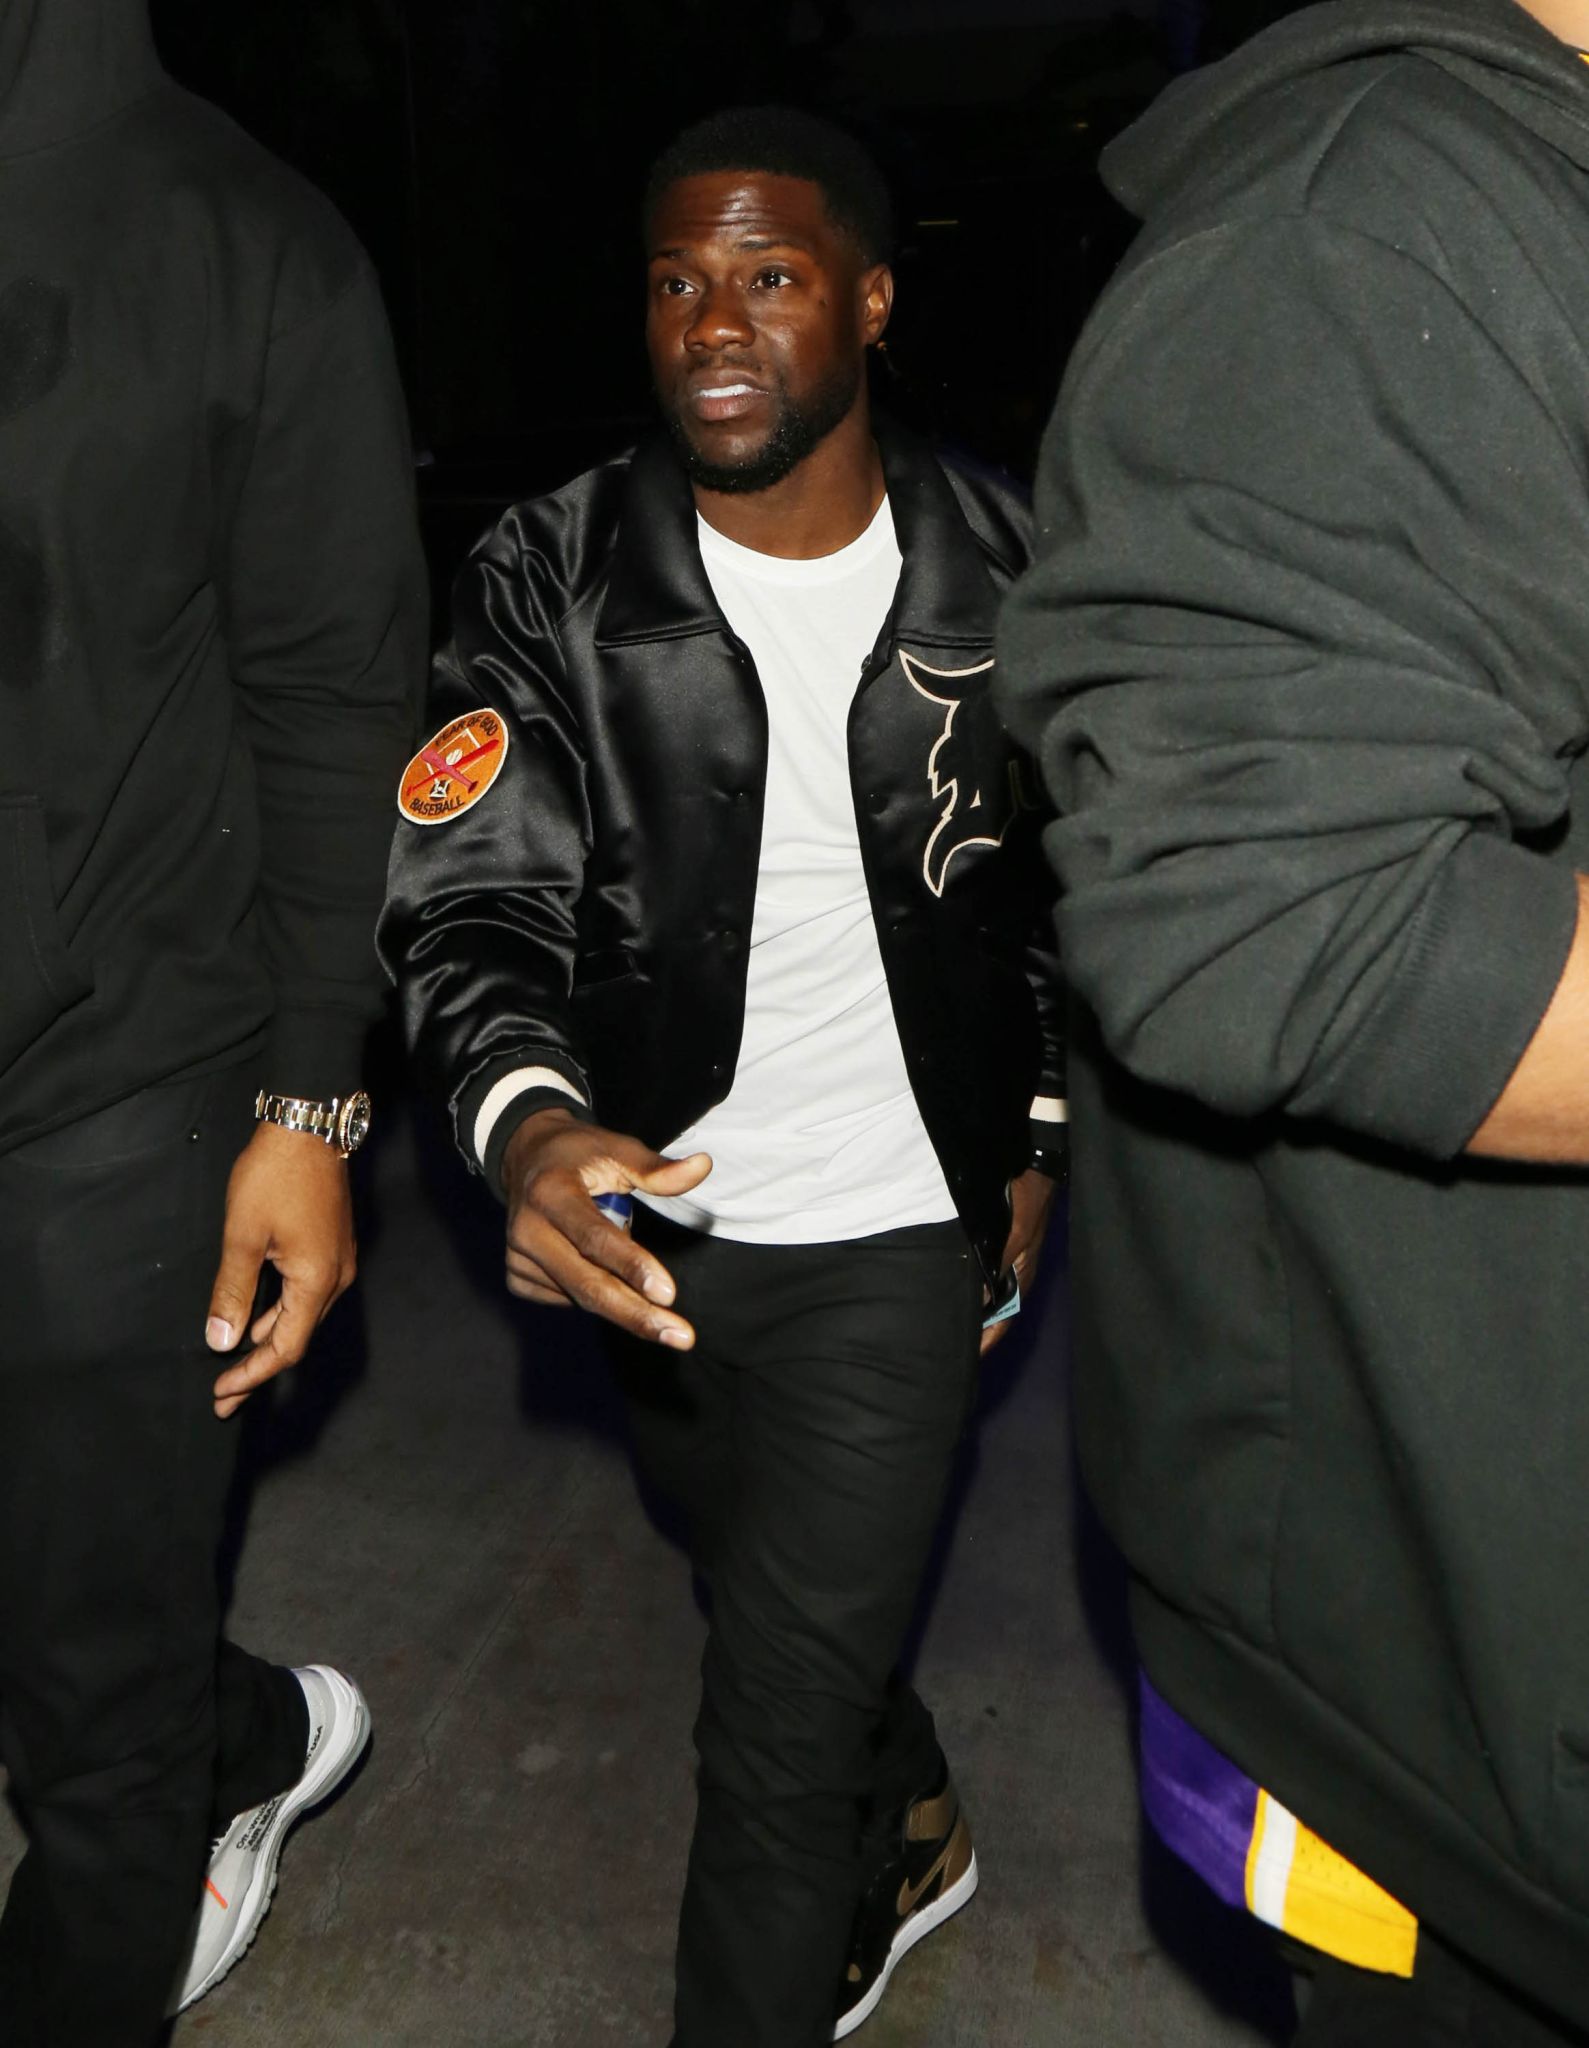 LOCAL NEWS: Kevin Hart Making a Tour Stop in Cleveland | 93.1 WZAK